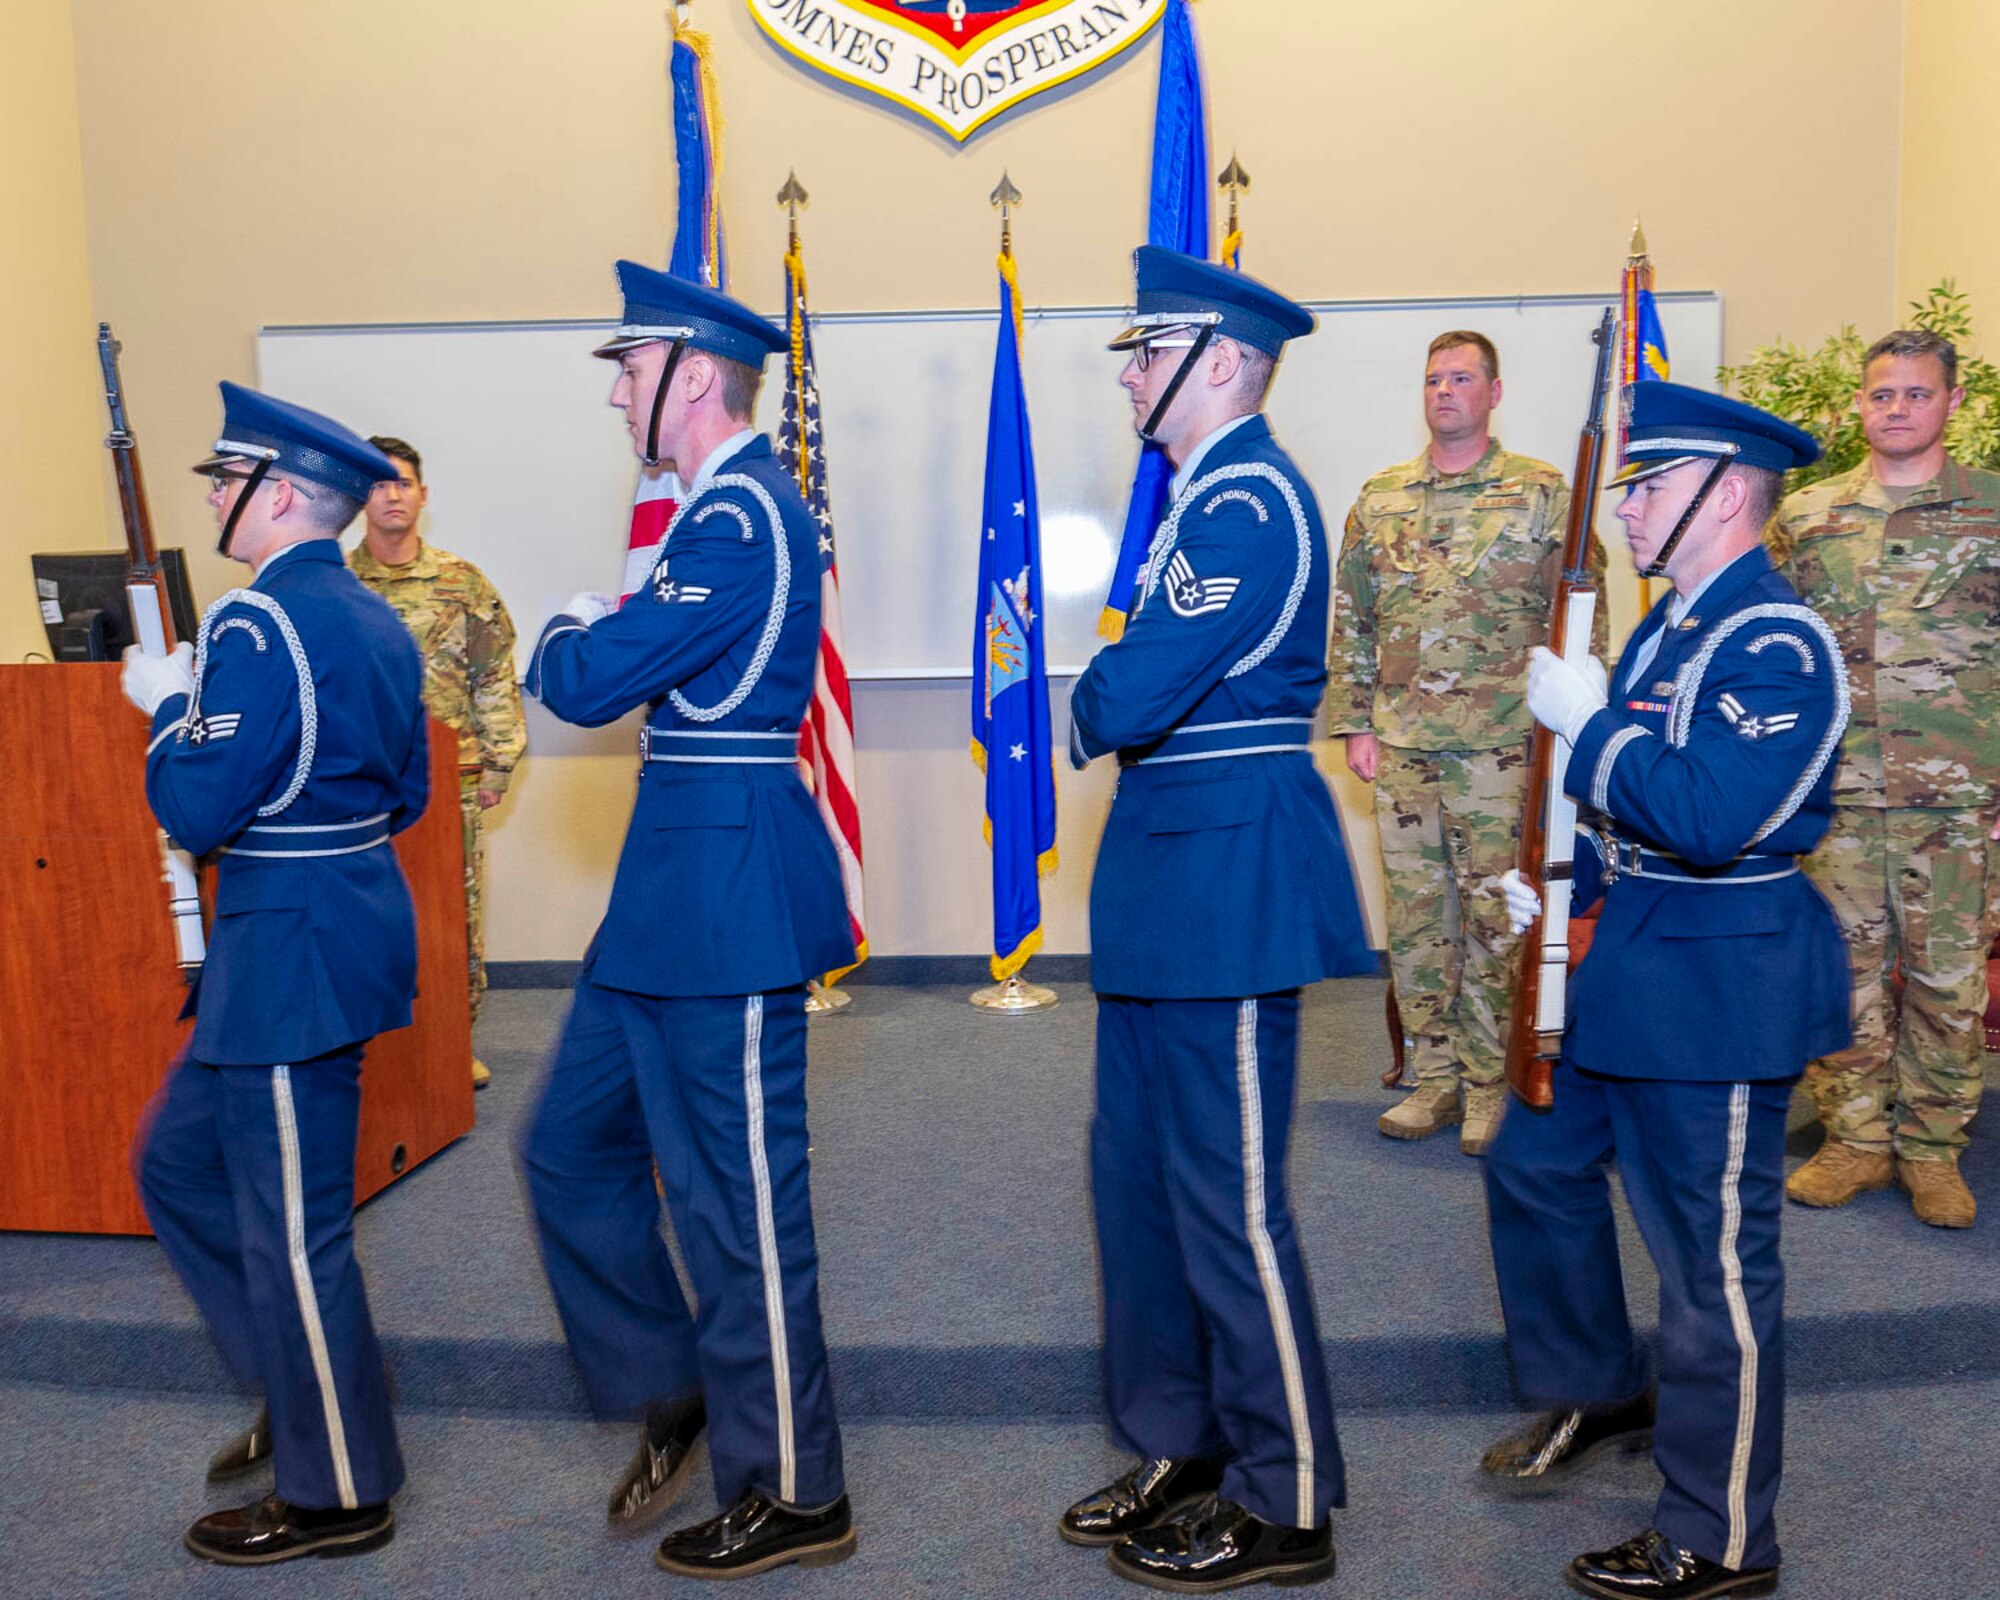 The honor guard presents the colors during an assumption of command ceremony for the 327th Airlift Squadron on Nov. 2, 2019, at Little Rock Air Force Base, Ark. The ceremony is a military tradition demonstrating the handover of responsibility and command to the newly appointed leadership. (U.S. Air Force Reserve photo by Maj. Ashley Walker)